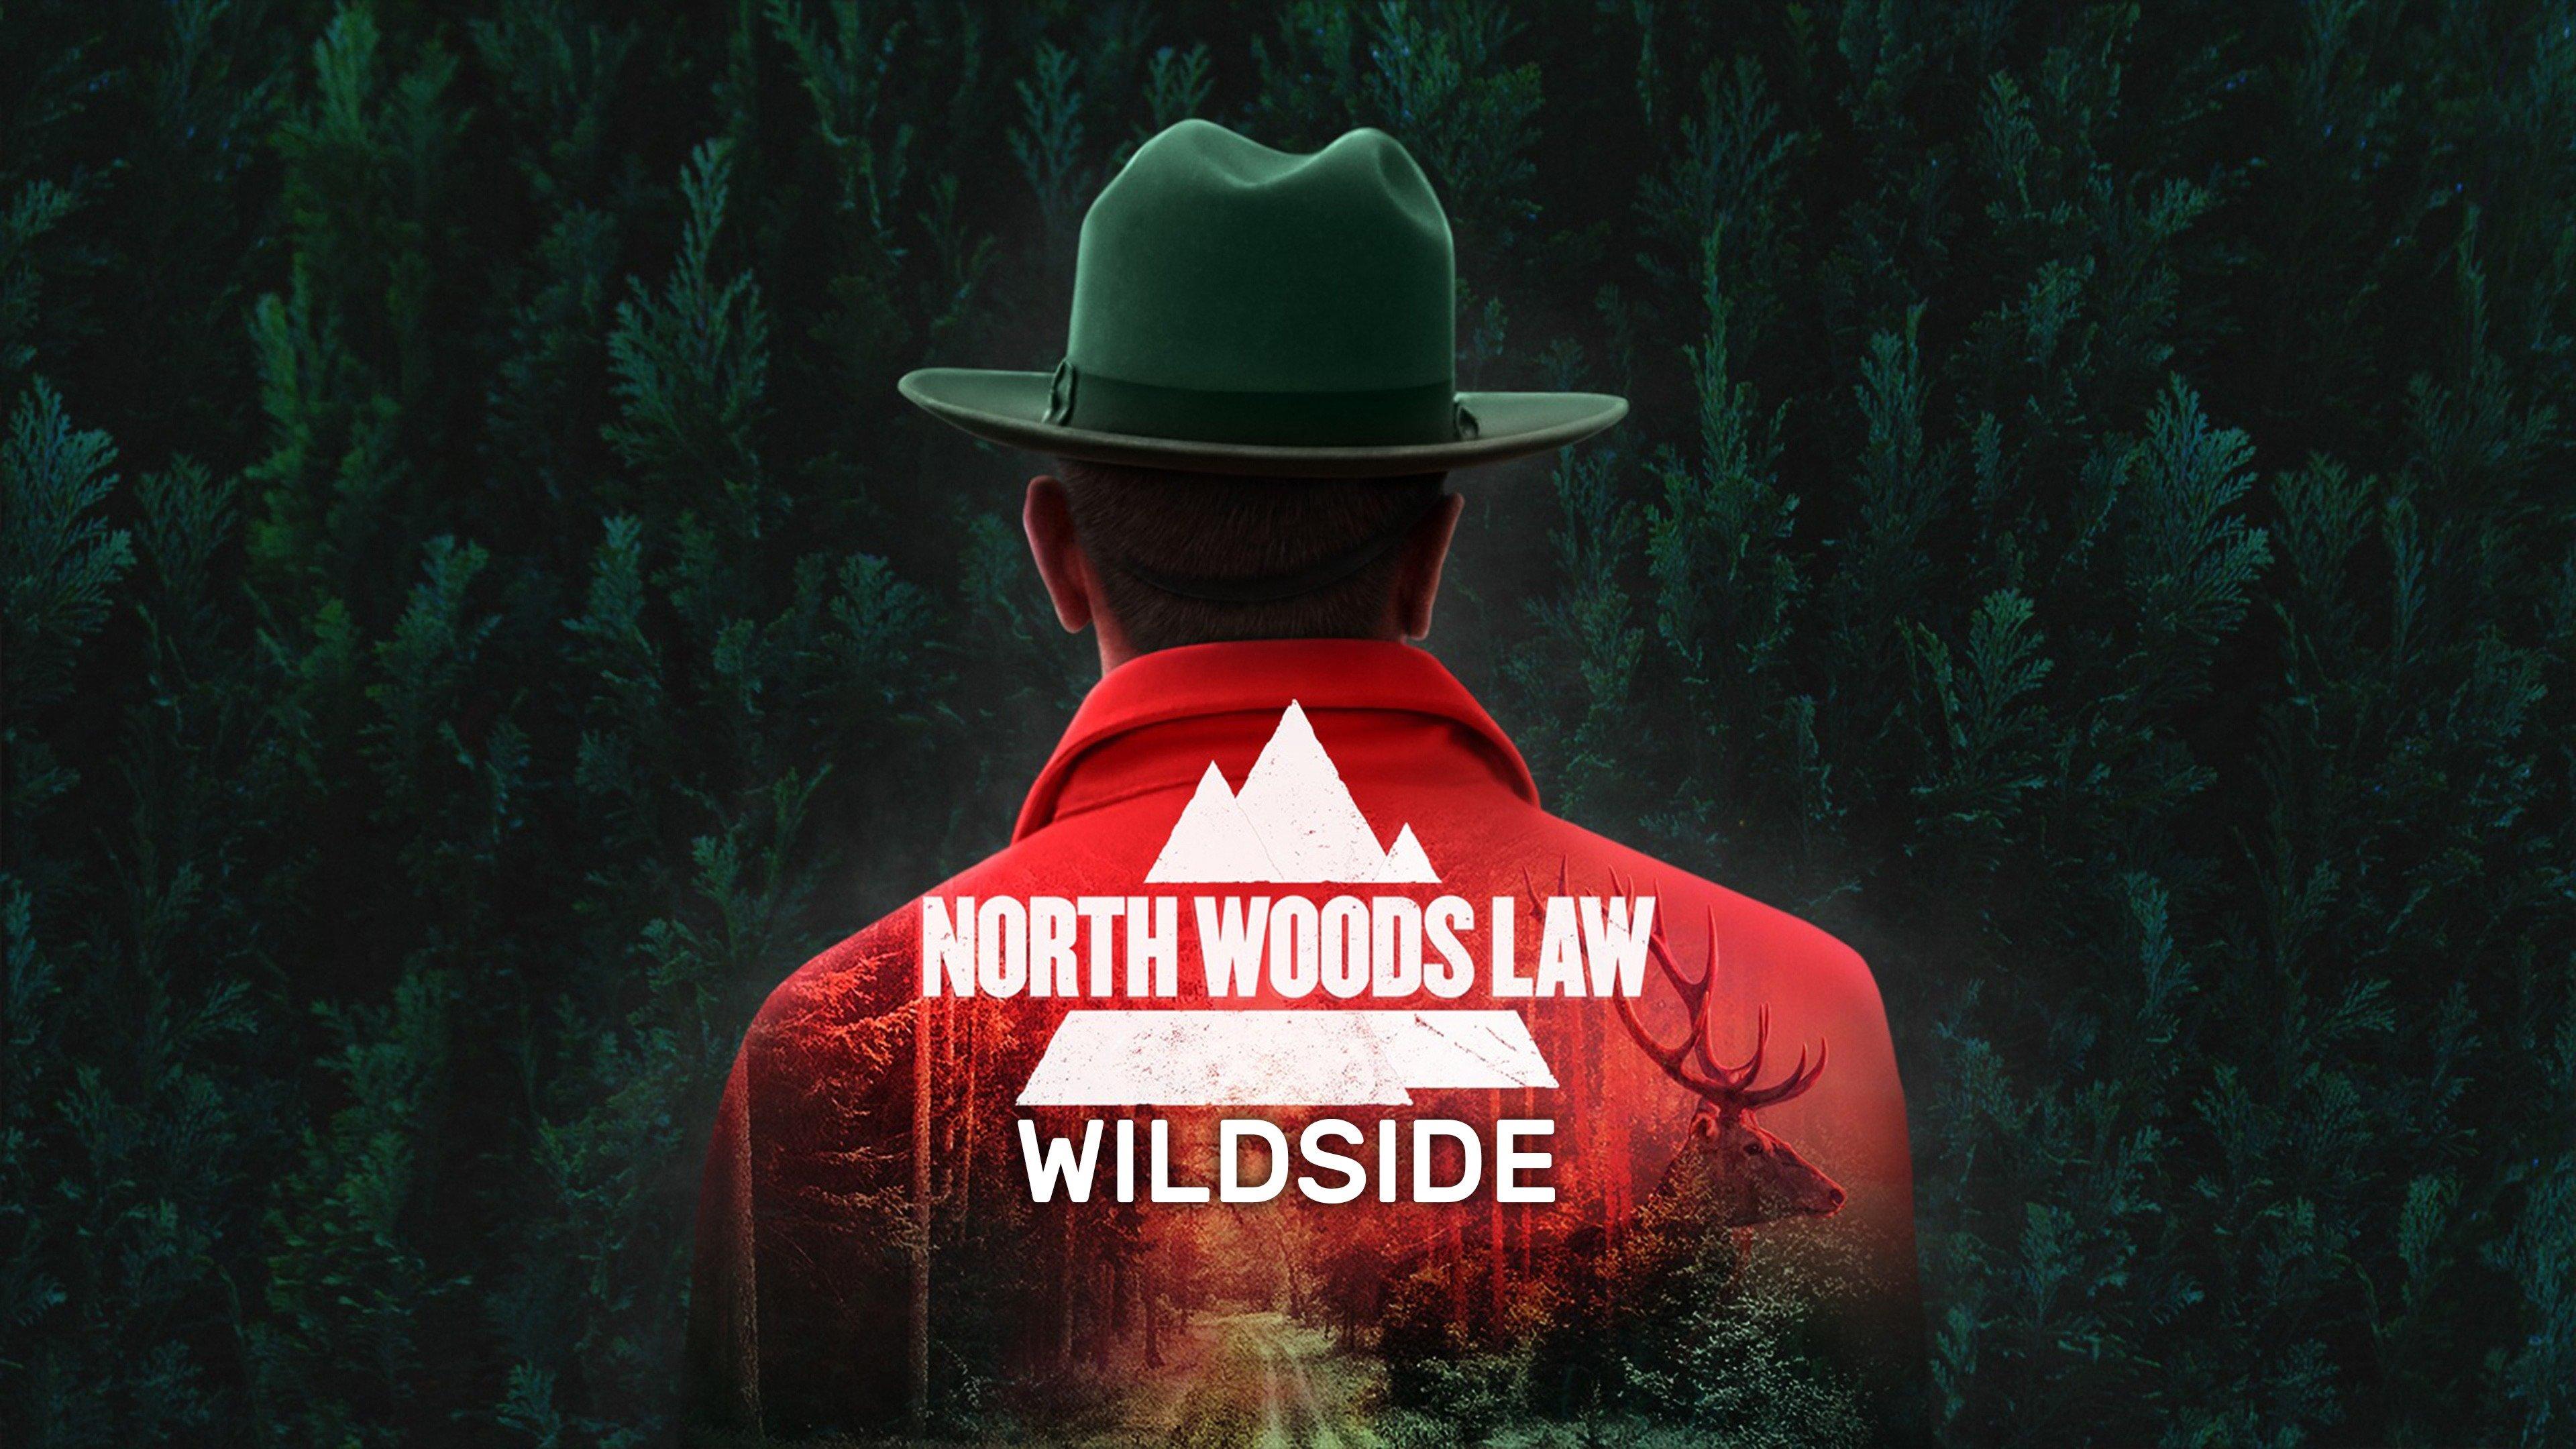 North Woods Law Wildside